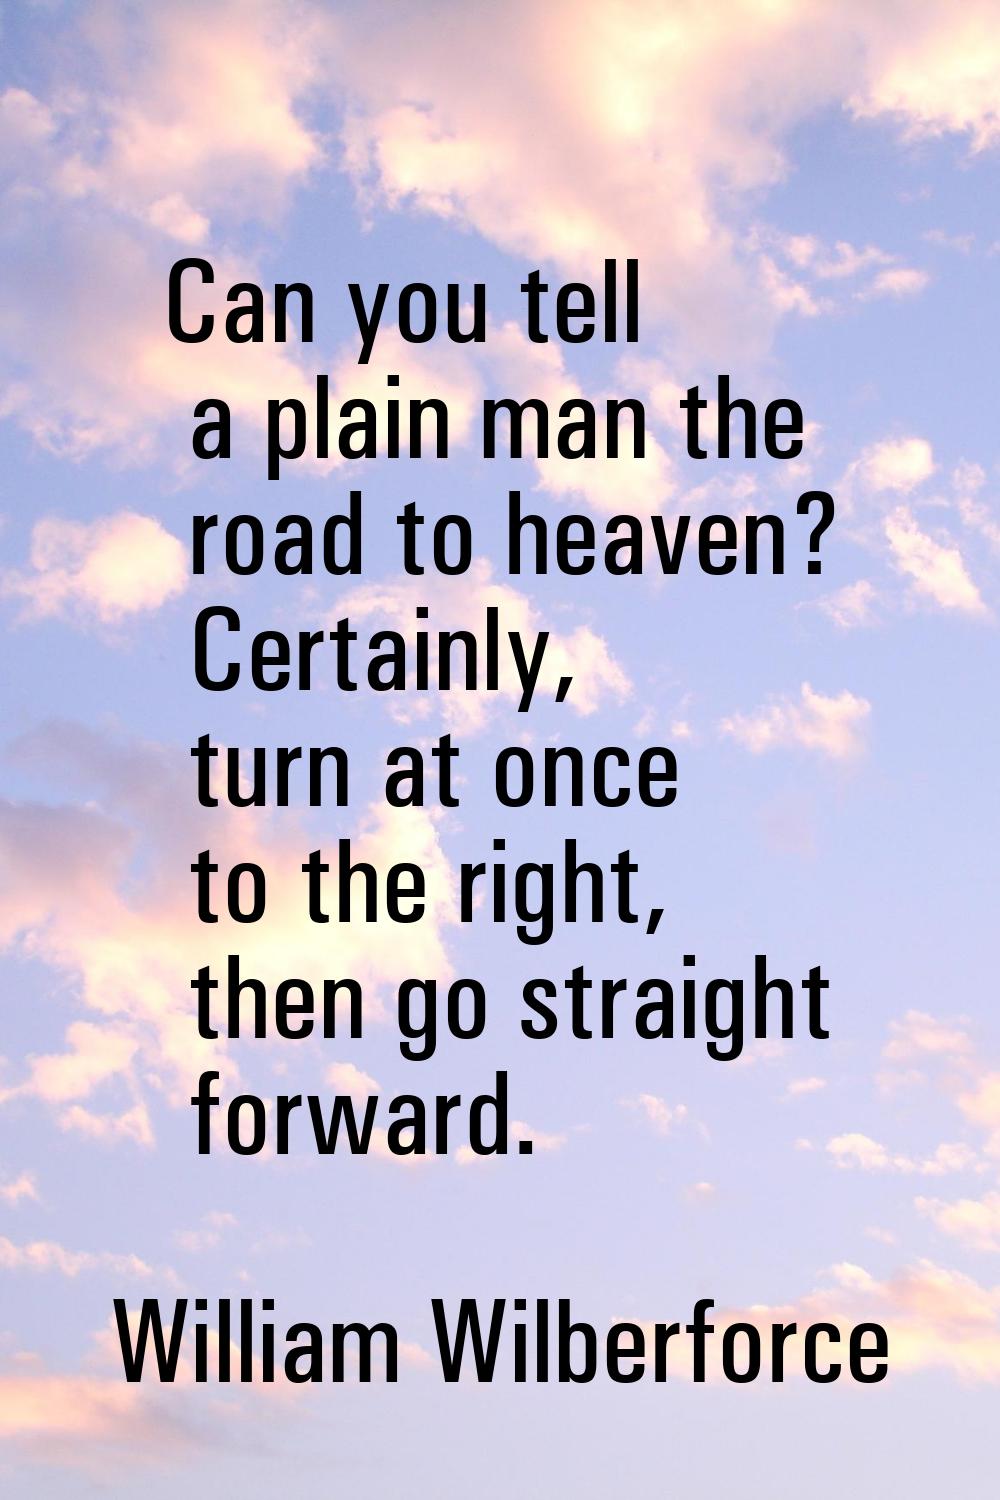 Can you tell a plain man the road to heaven? Certainly, turn at once to the right, then go straight